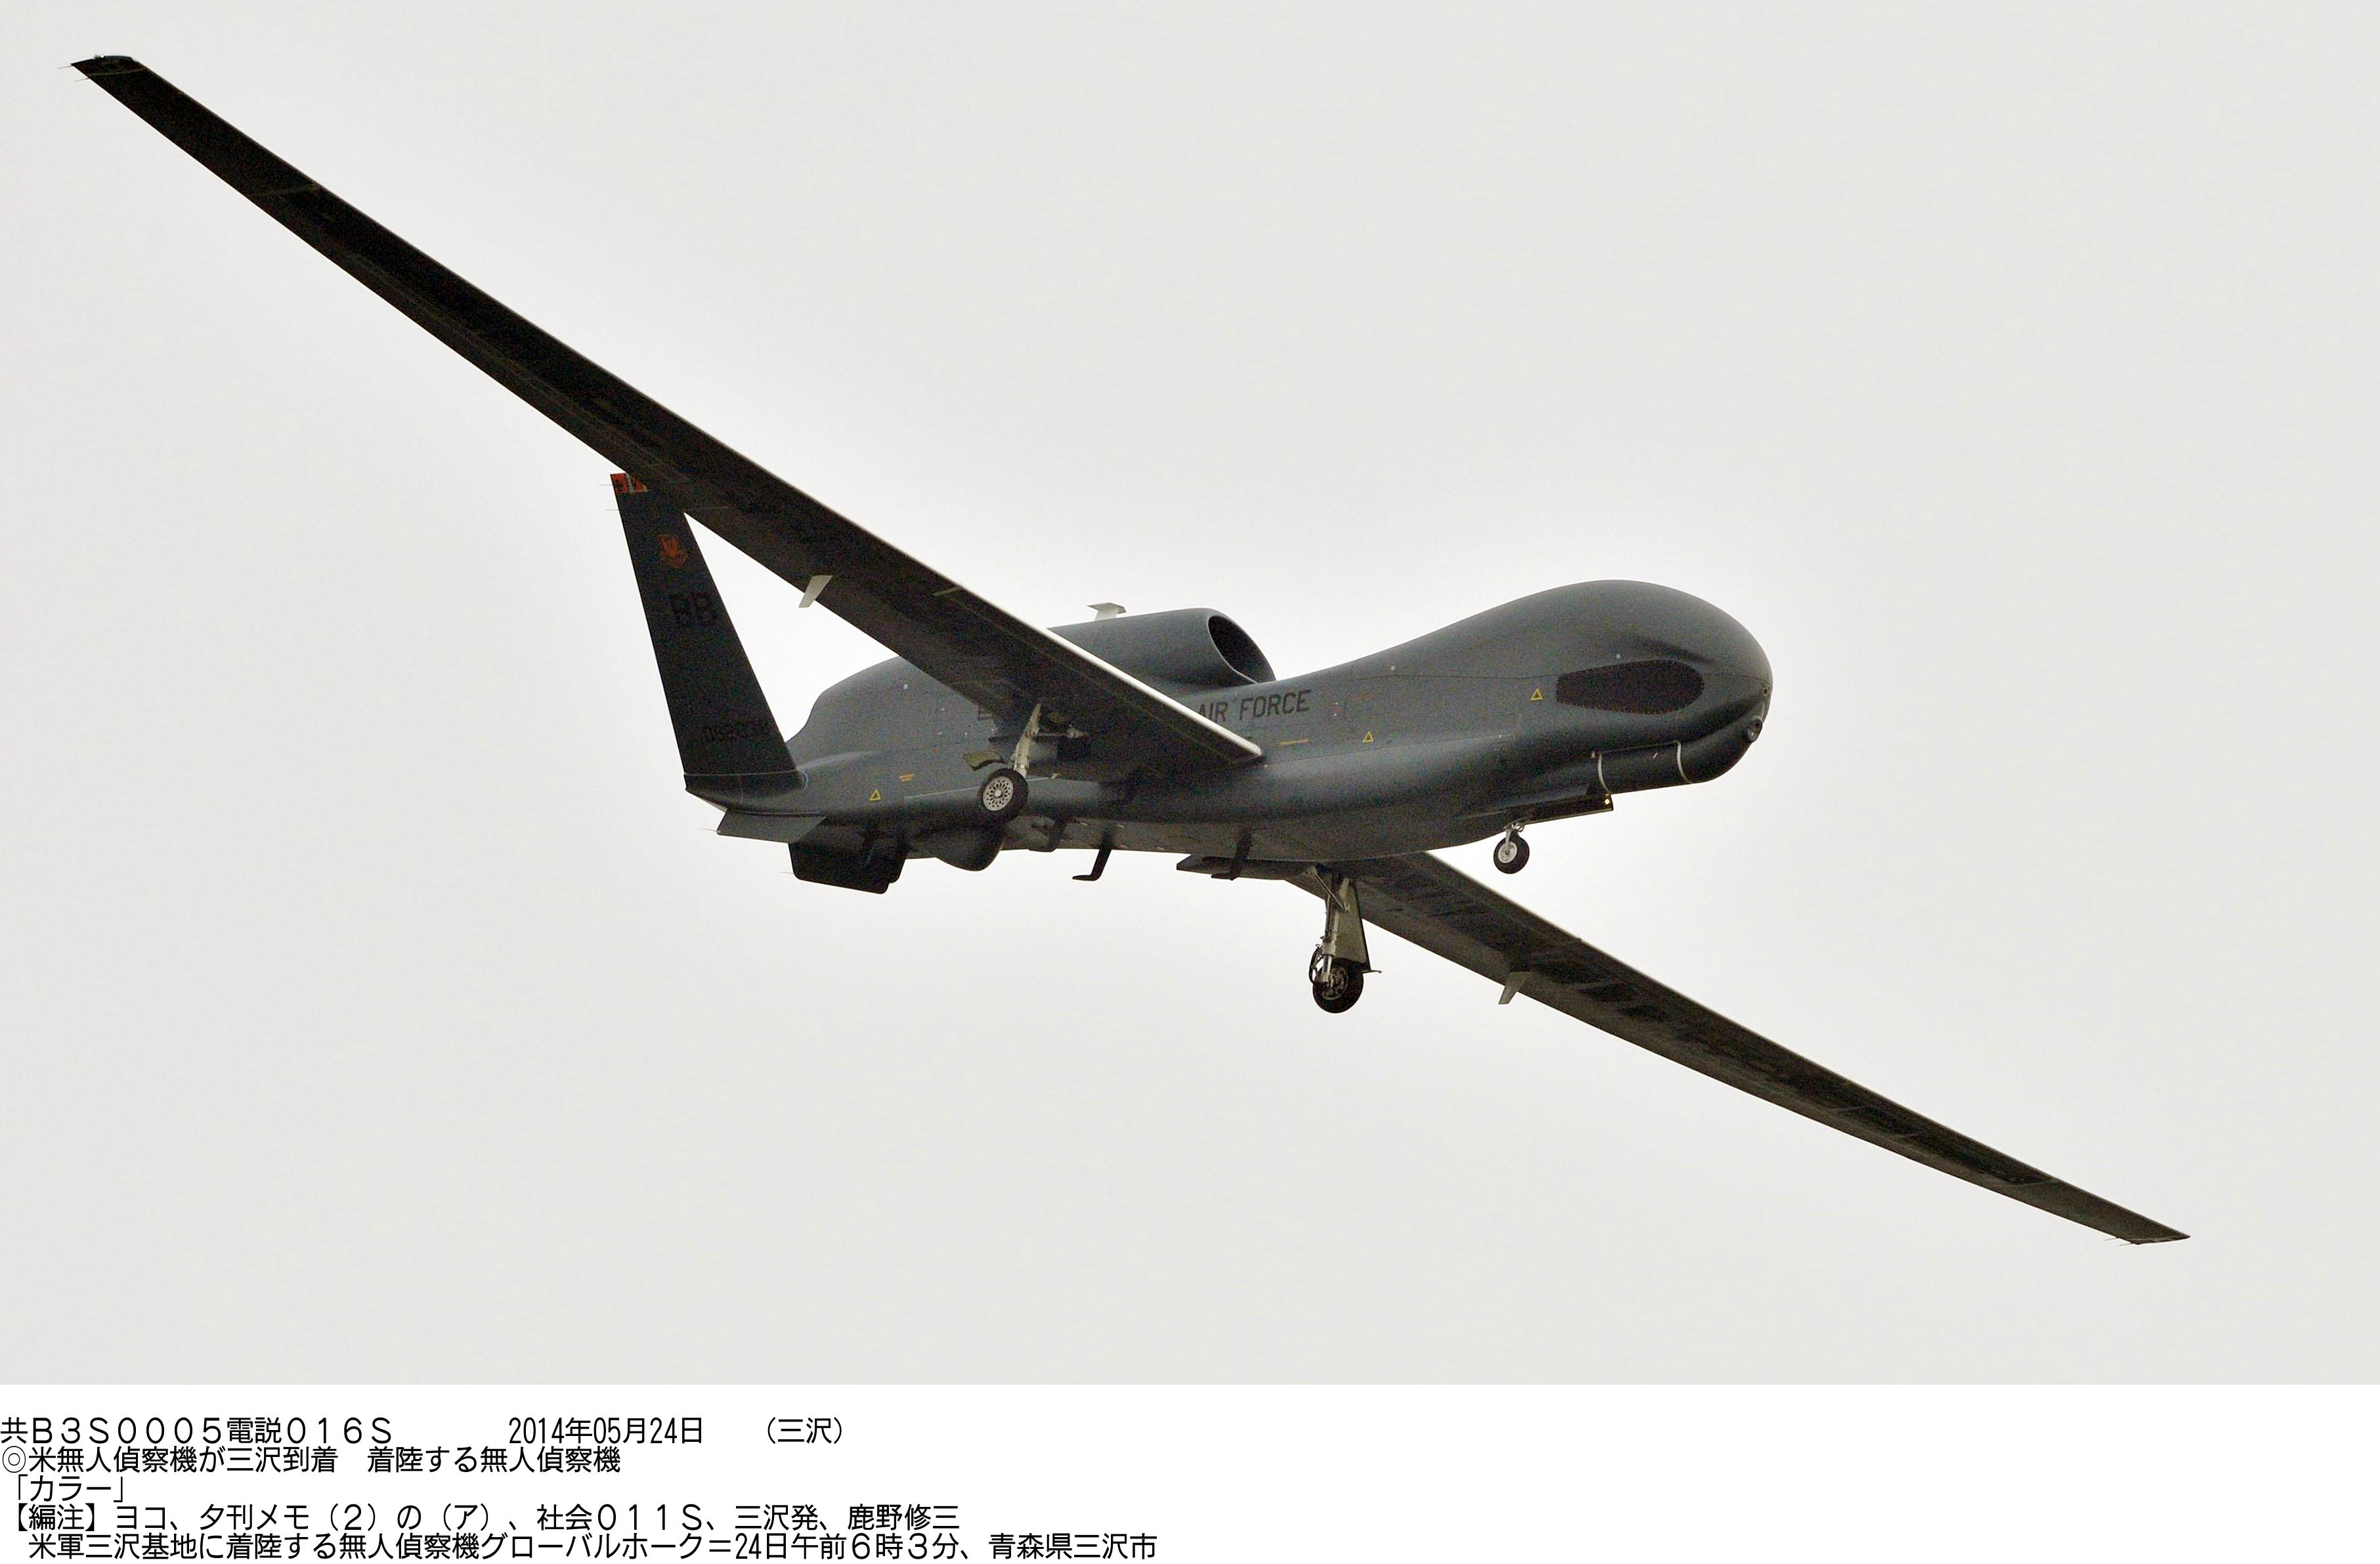 The first of two Global Hawk unmanned surveillance drones flies over the U.S. Misawa Air Base in Aomori Prefecture after arriving early Saturday morning. | KYODO